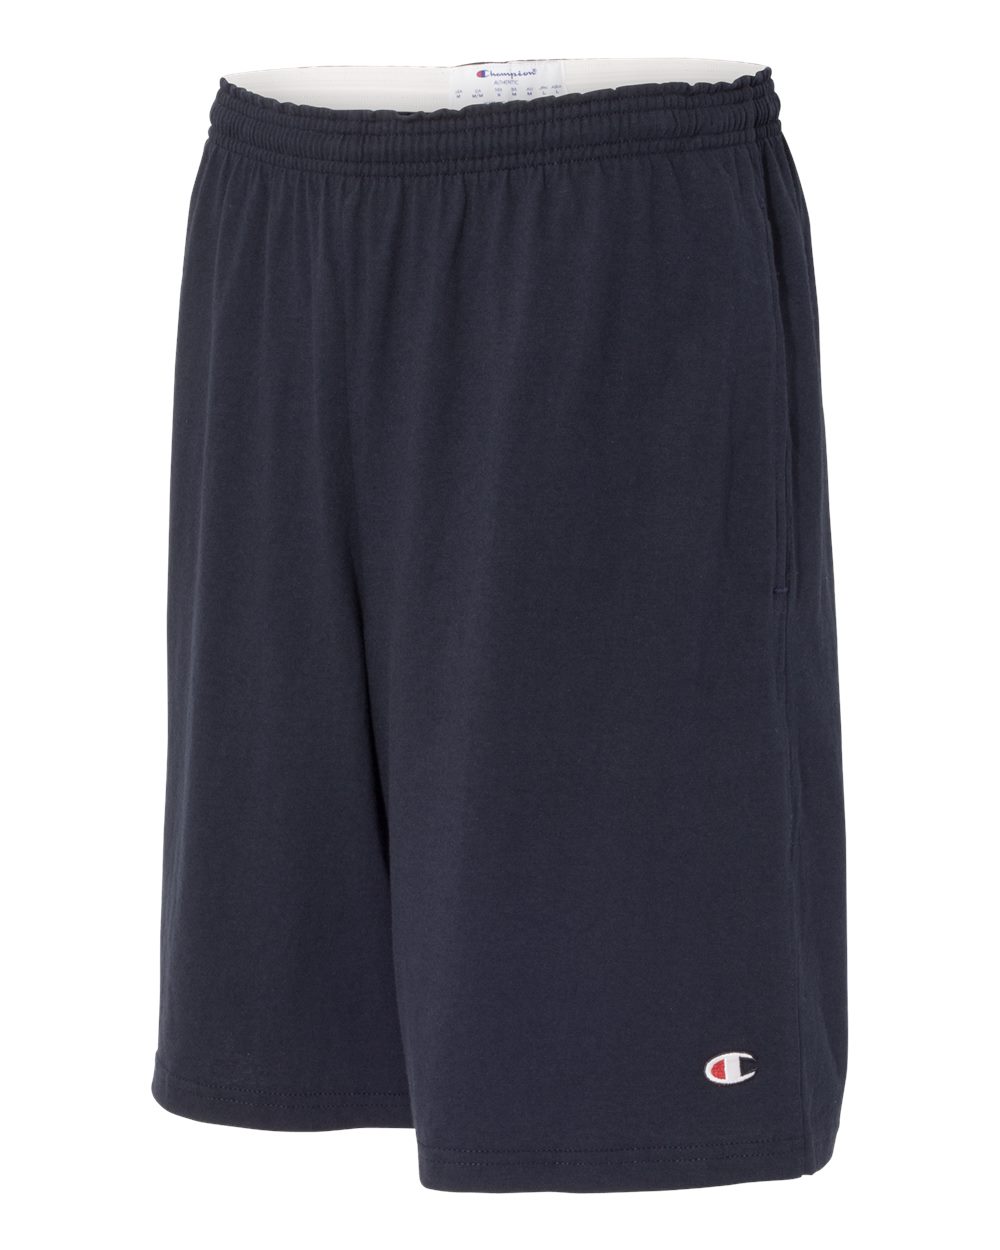 Champion 8180 - 9" Inseam Cotton Jersey Shorts with Pockets